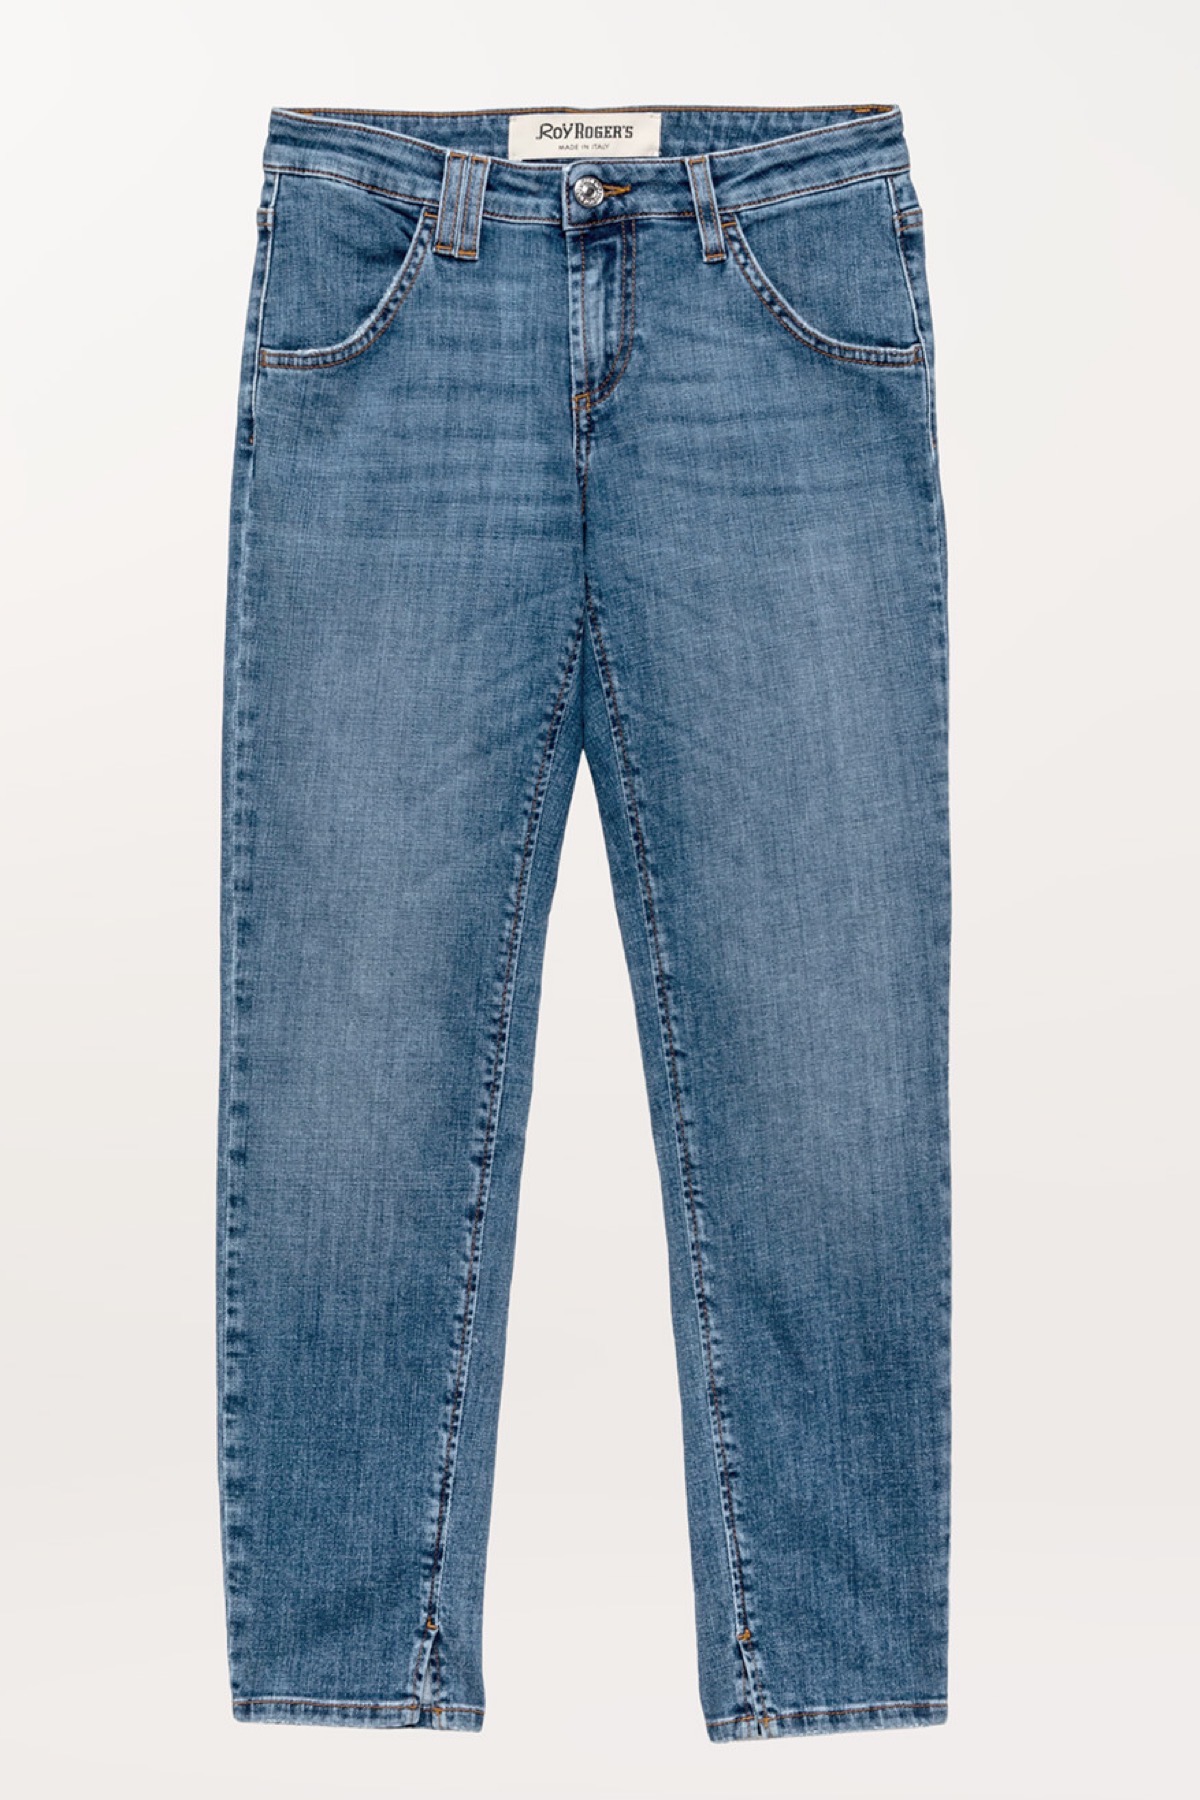 JEANS ROY ROGERS SKINNY SUPER STRETCH